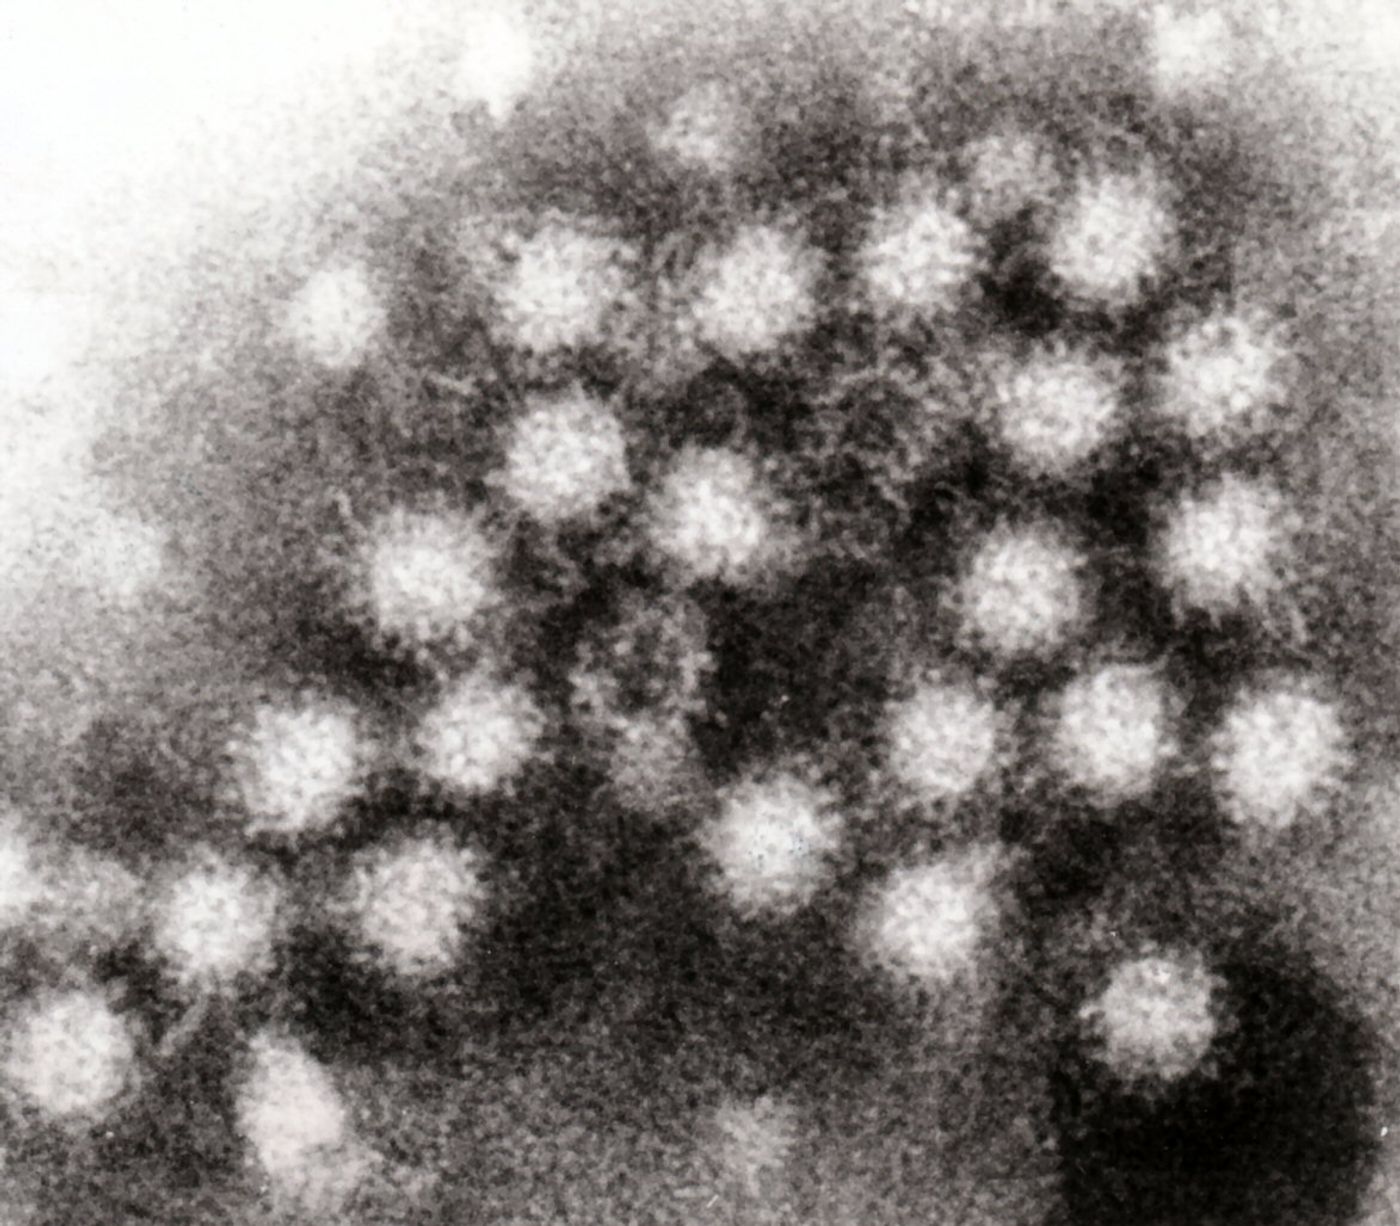 Aerosolized norovirus particles can be found within 1 meter of an infected patients room.